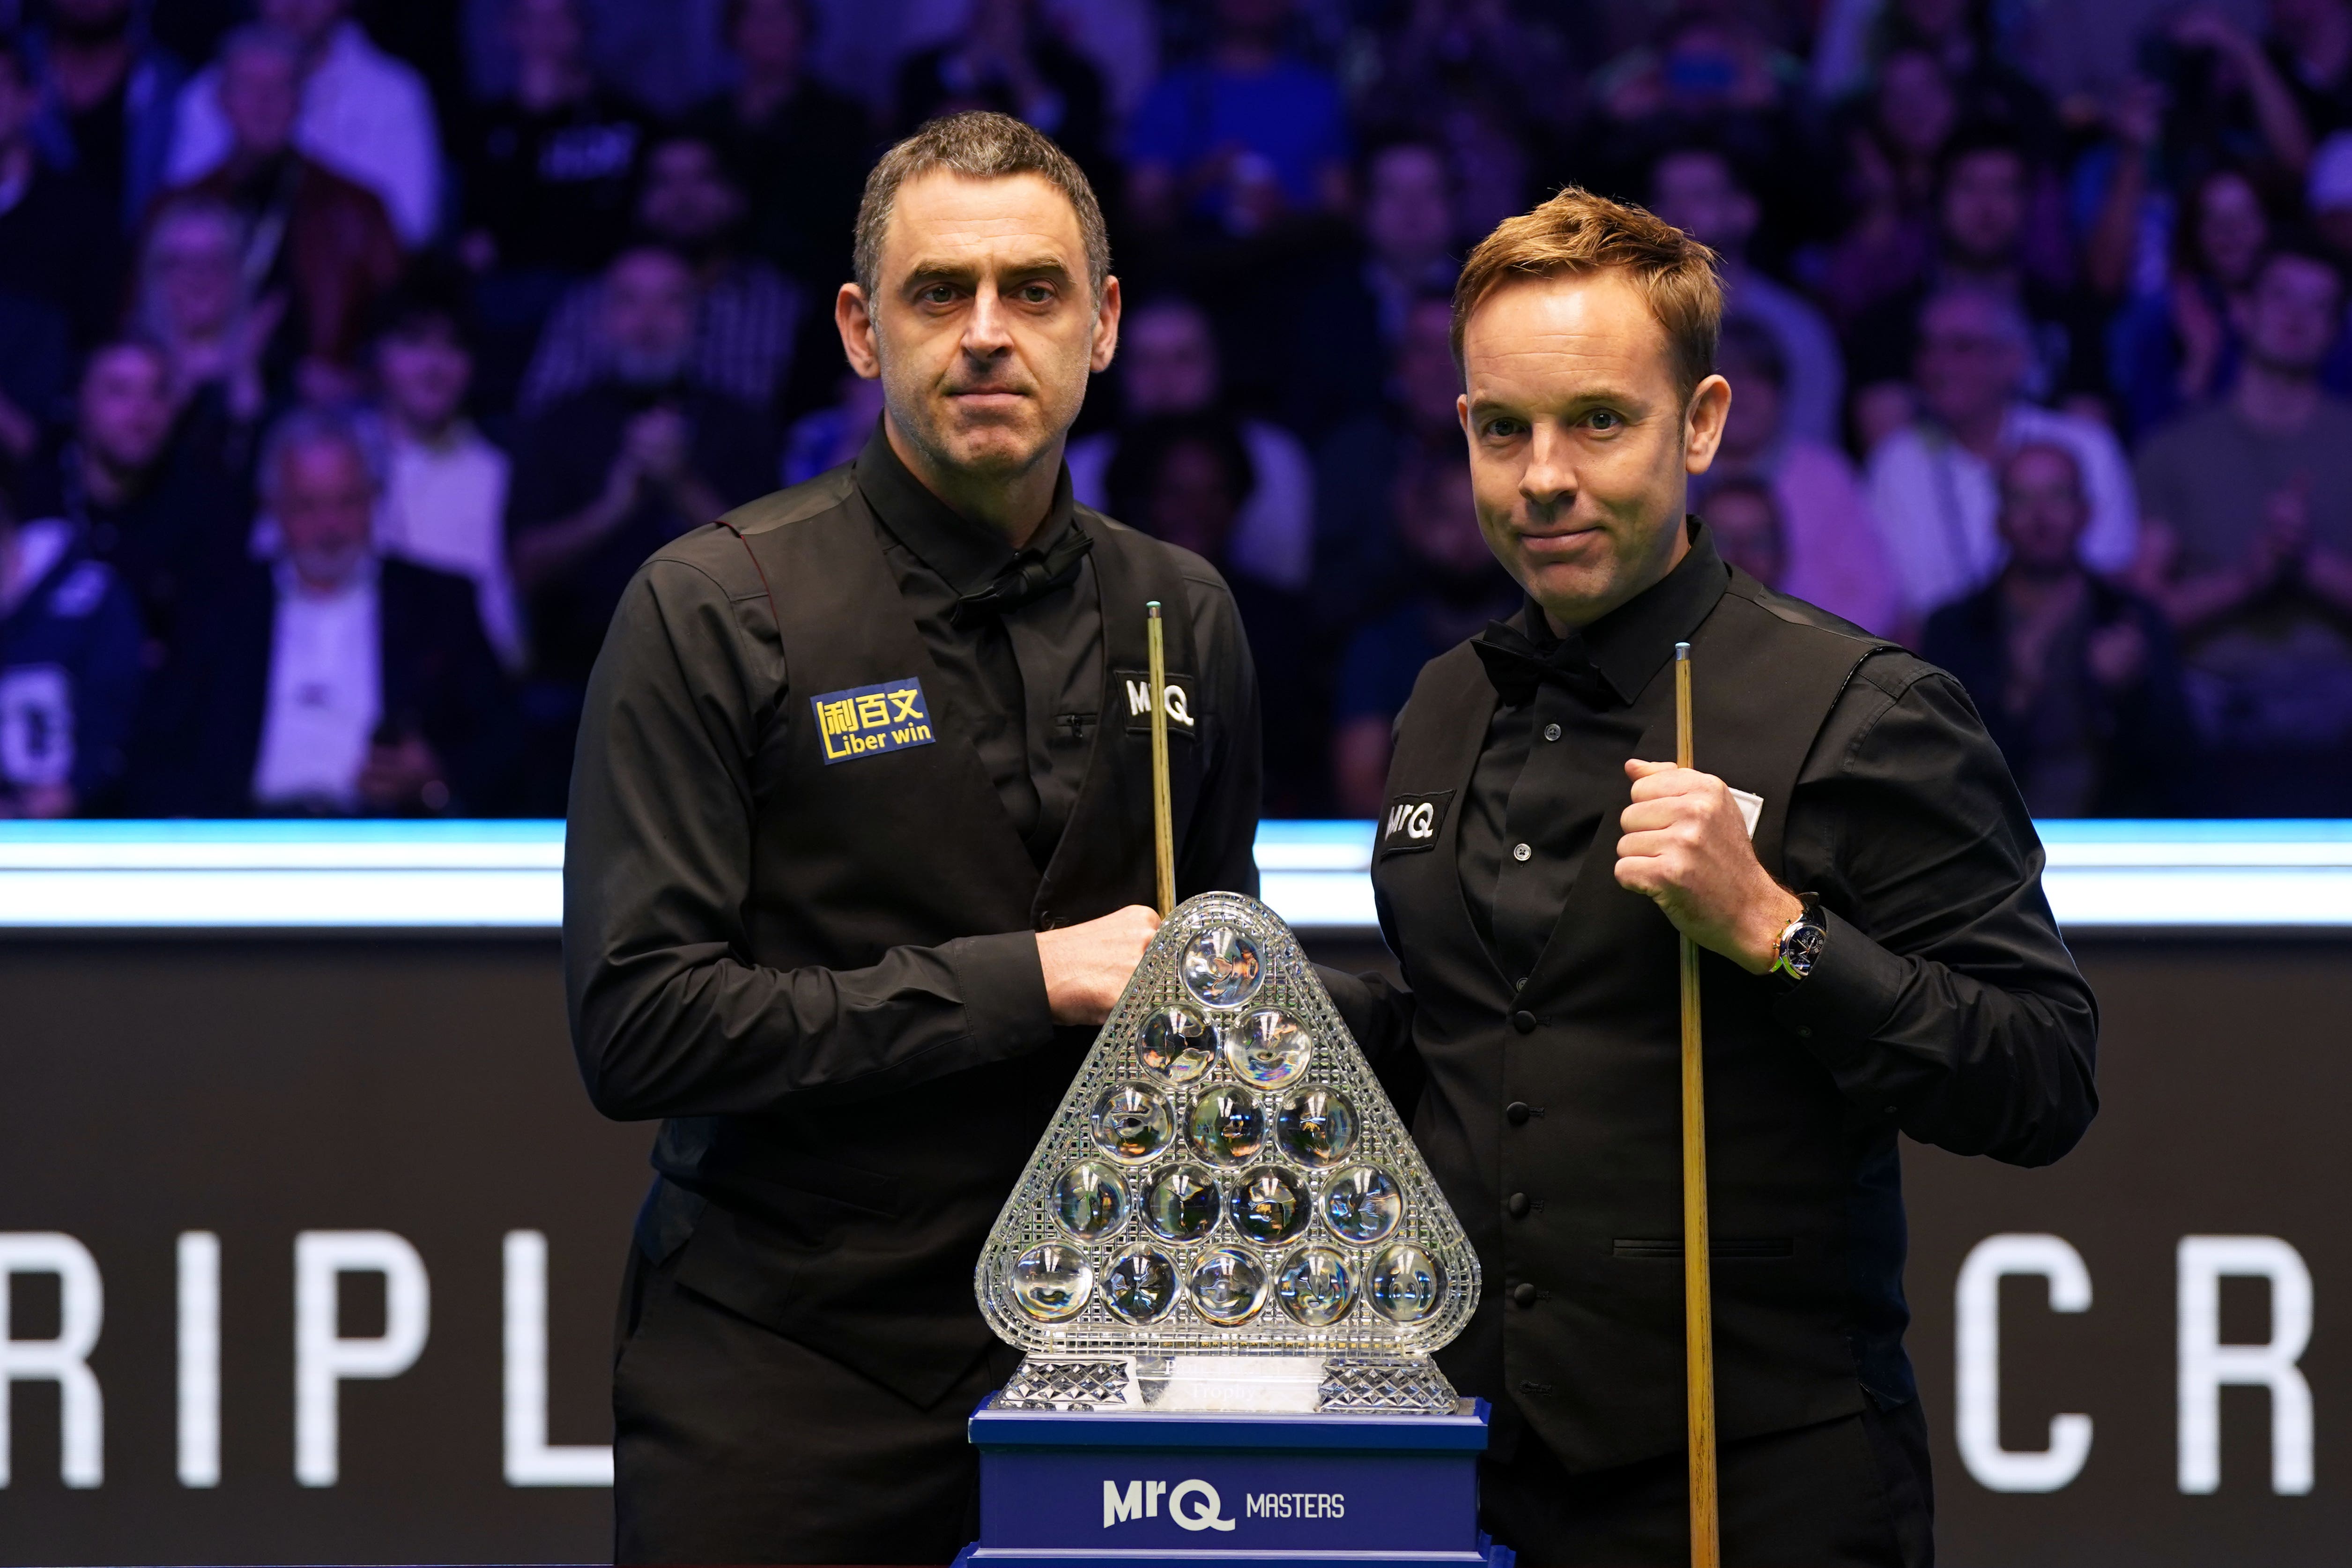 Ronnie O’Sullivan and Ali Carter have reignited their long-standing feud